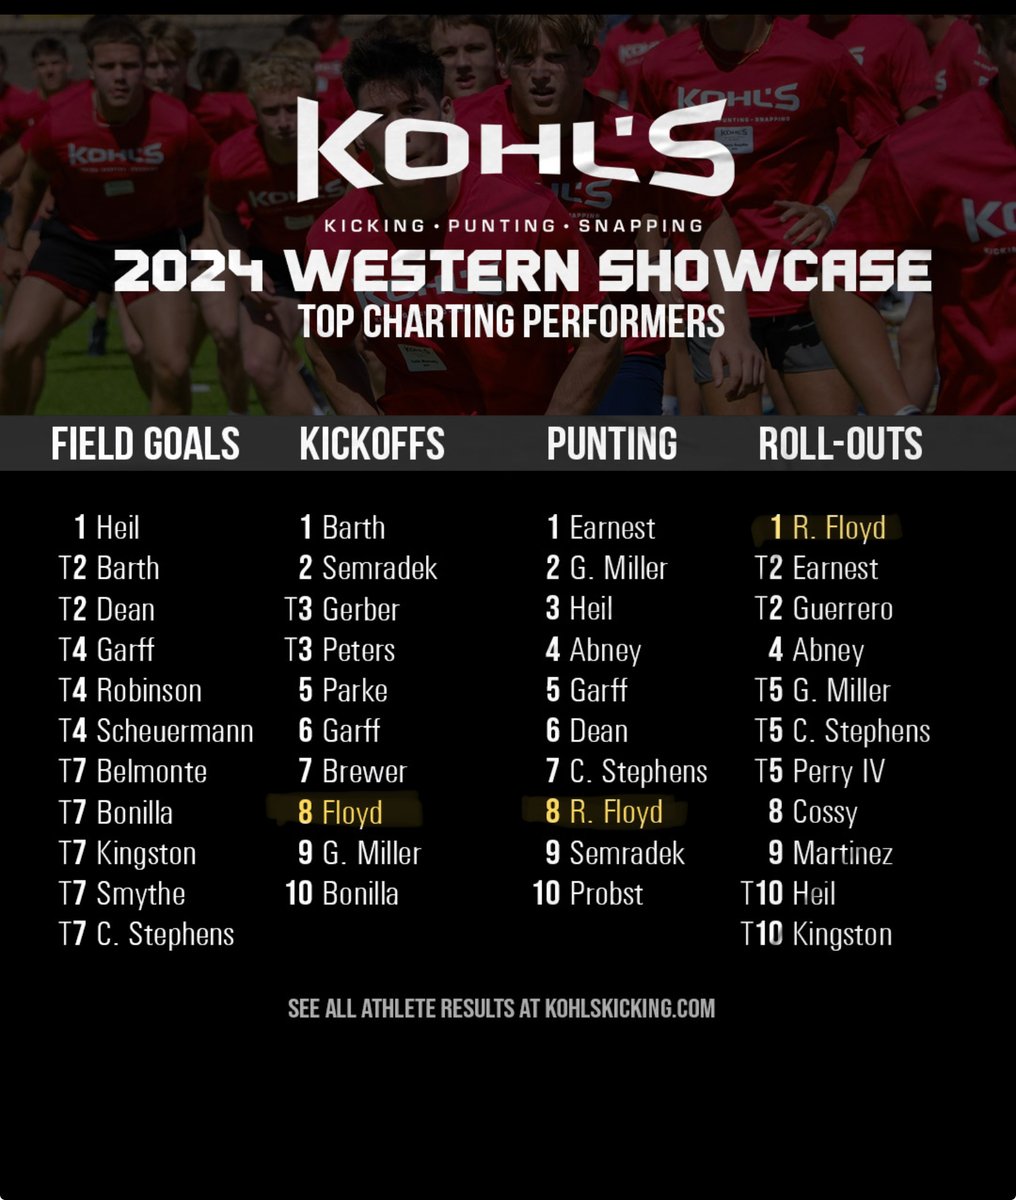 Had a great time @KohlsKicking Western Showcase last weekend. Finished first in roll-outs and charted 8th in kickoffs and punting. Time to get back to work with @steverausch17 @Mack_Mulhern @hzfbfamily @CoachDitmore